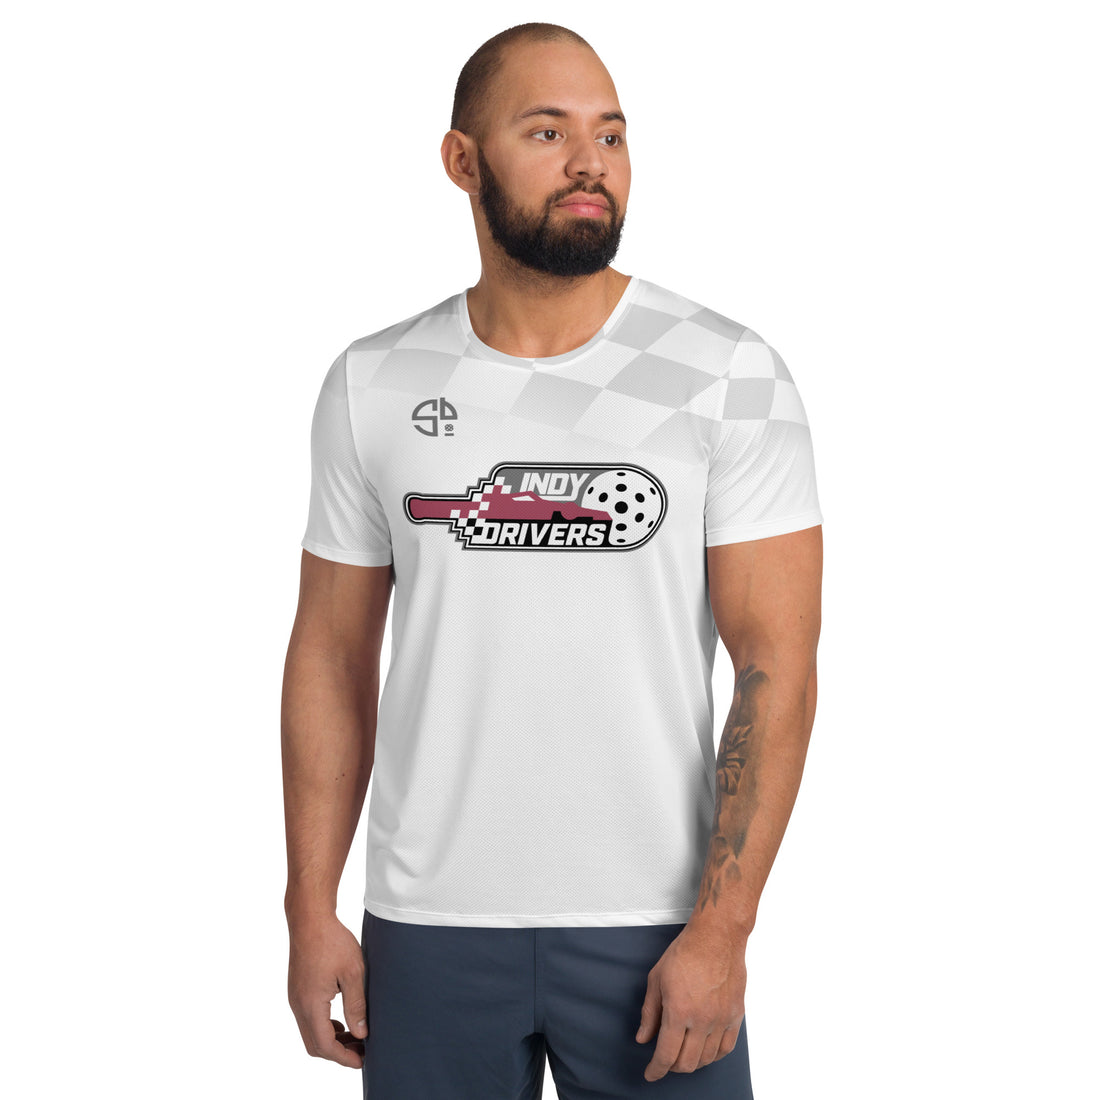 Mills 13, aka Chris Miller, Indy Drivers™ SKYblue™ 2023 Authentic Shirt - White